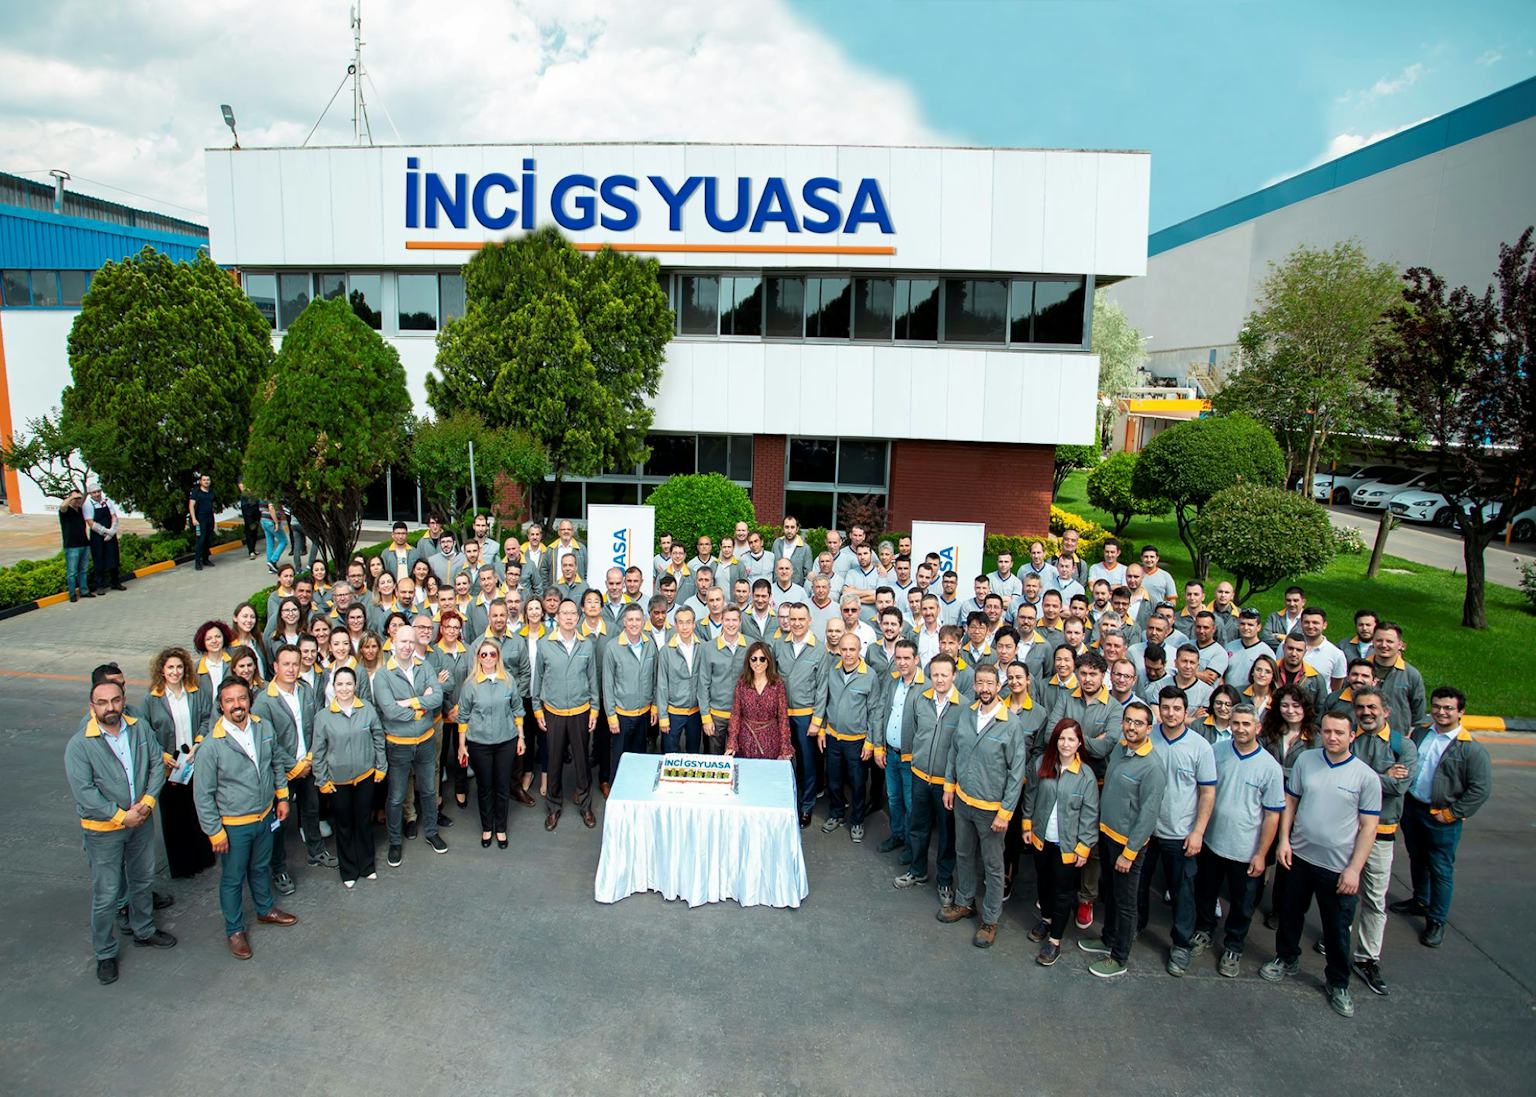 Seven Years of İnci GS Yuasa Partnership Marked by Technological Breakthroughs